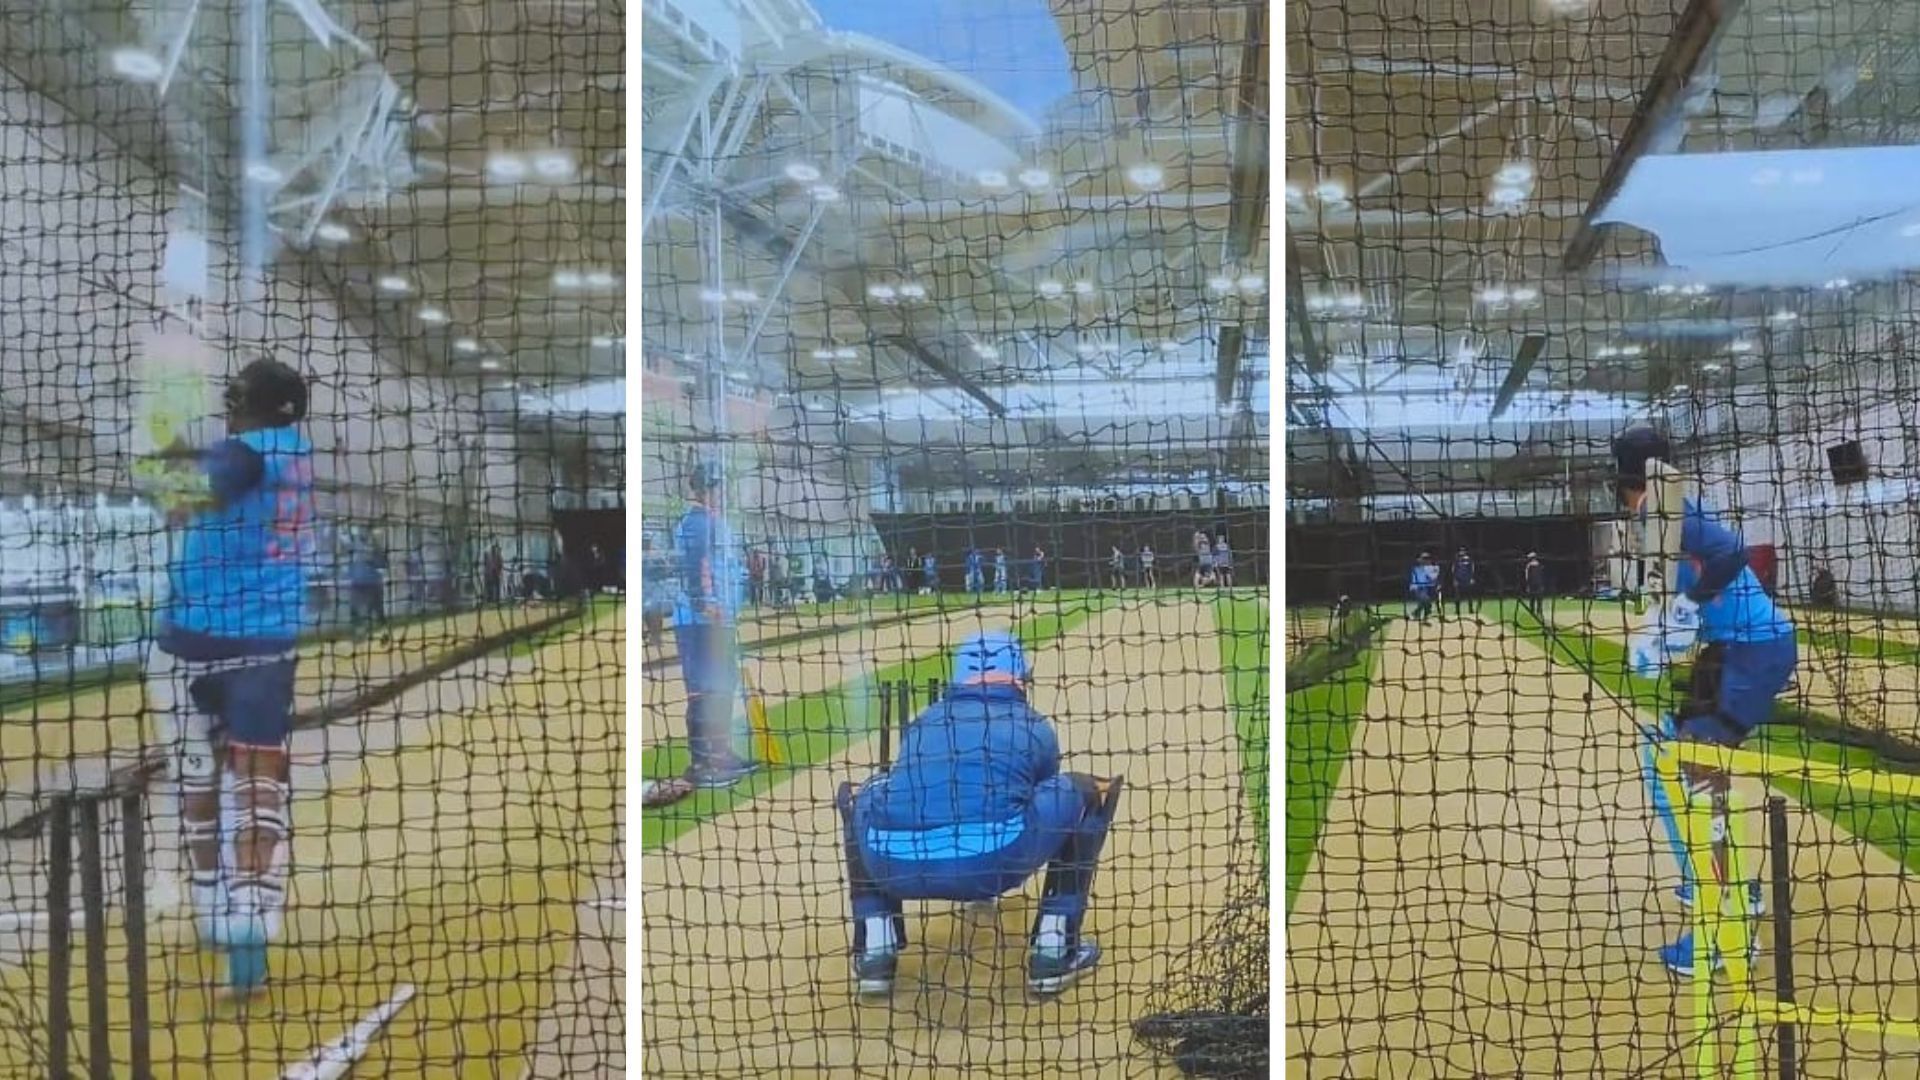 Ravichandran Ashwin (L), Dinesh Karthik and Axar Patel in action in the nets